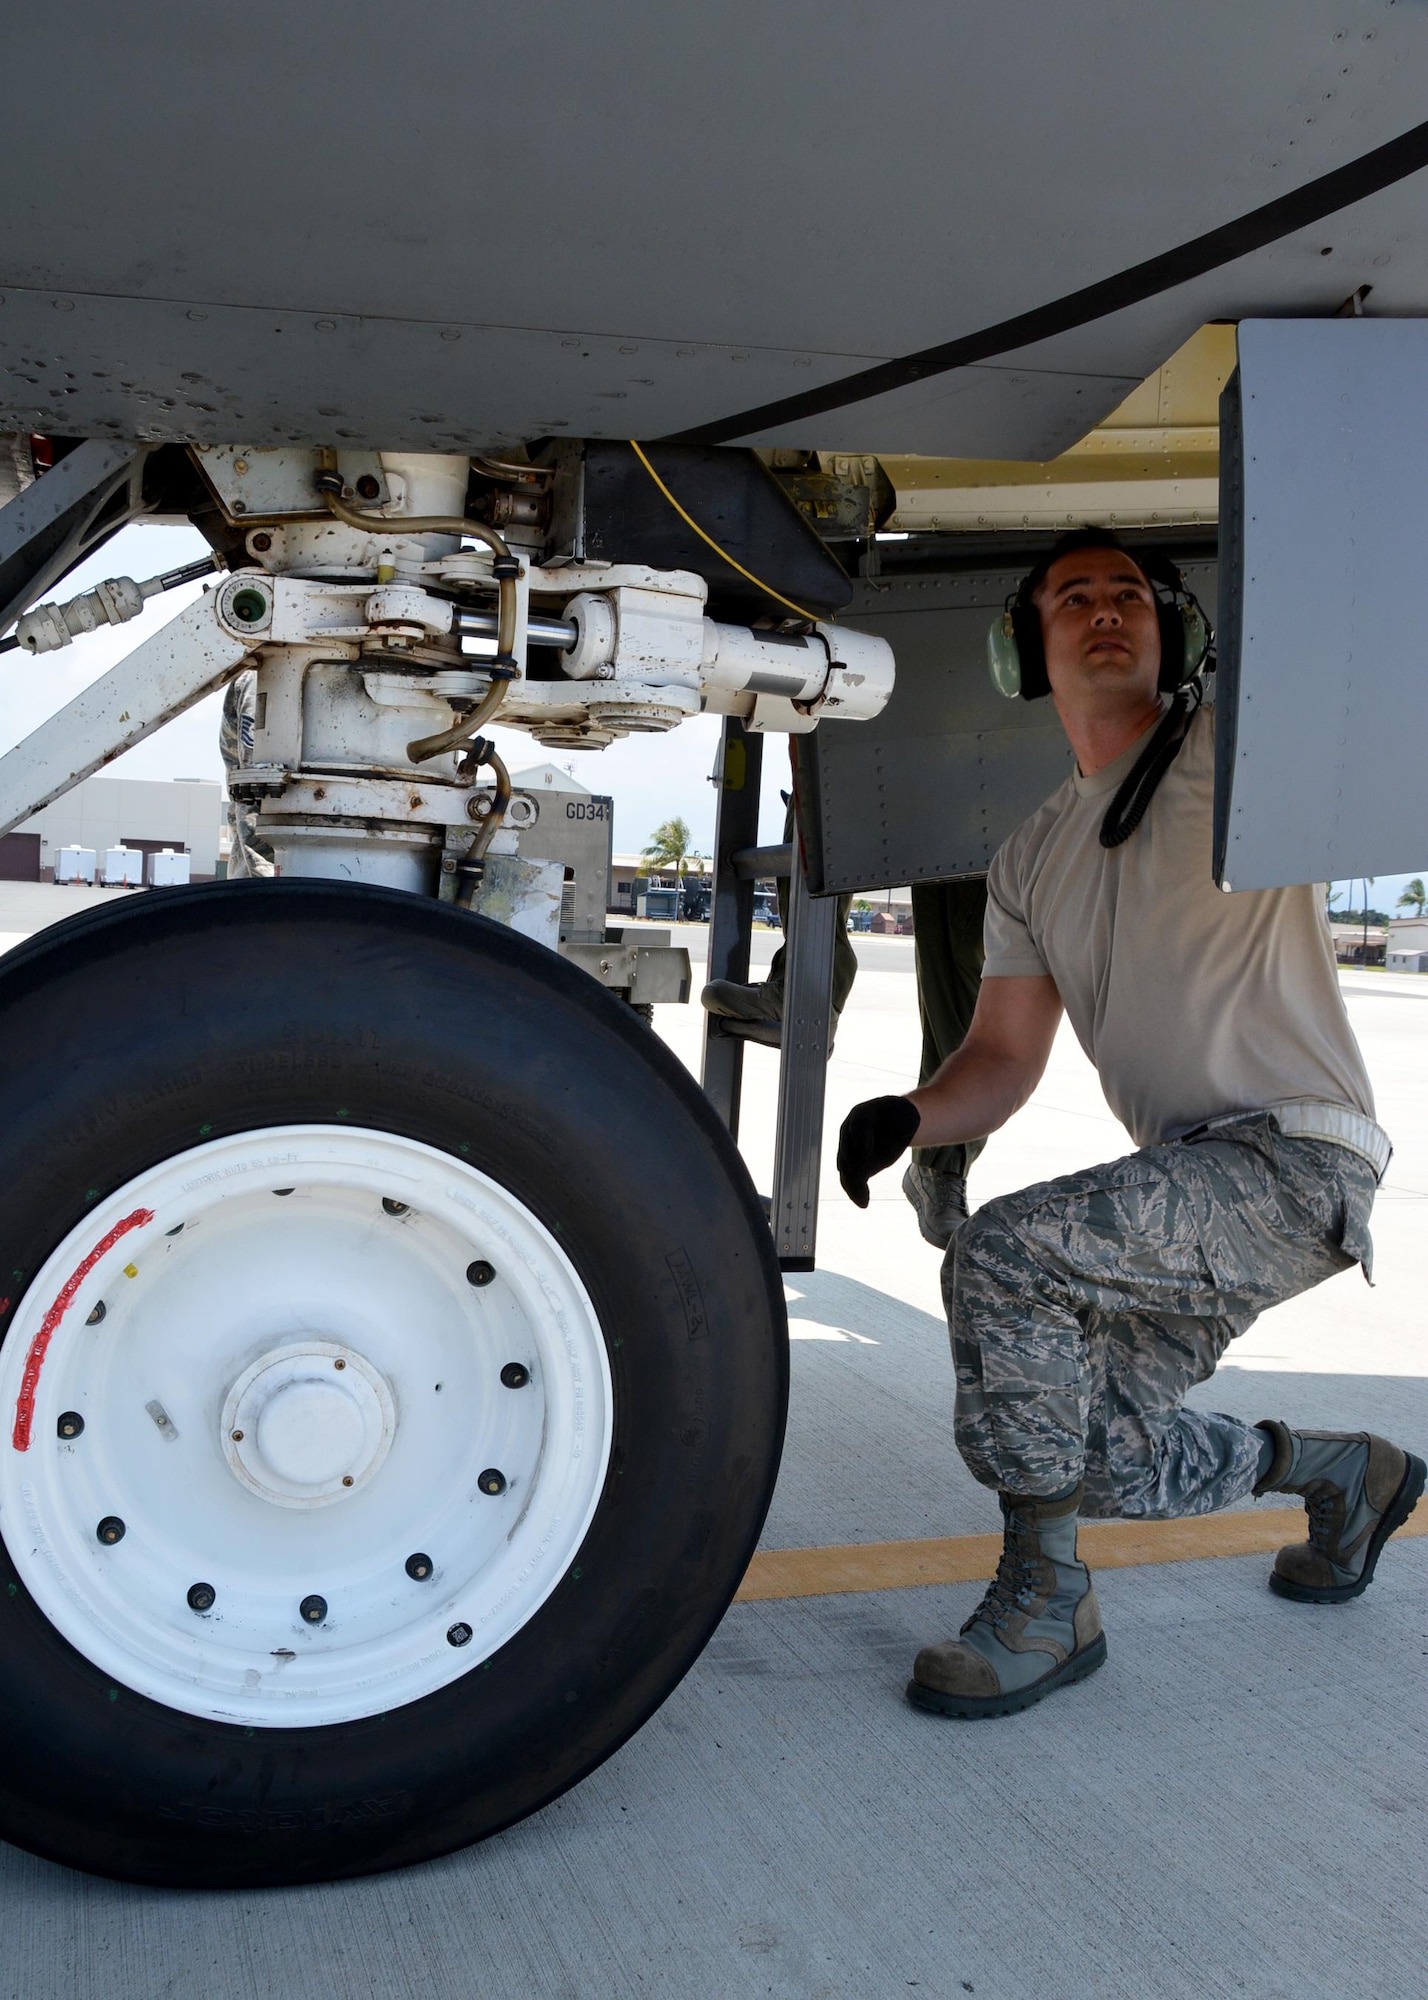 JOINT BASE PEARL HARBOR-HICKAM - Tech Sgt. Michael Dunning, crew chief with the 507th Aircraft Maintenance Squadron at Tinker Air Force Base, Okla., performs a nose landing gear inspection following an aerial refueling mission as part of Rim of the Pacific 2016. Twenty-six nations, more than 40 ships and submarines, more than 200 aircraft, and 25,000 personnel are participating in RIMPAC from June 30 to Aug. 4, in and around the Hawaiian Islands and Southern California. (U.S. Air Force photo\Tech. Sgt. Lauren Gleason)